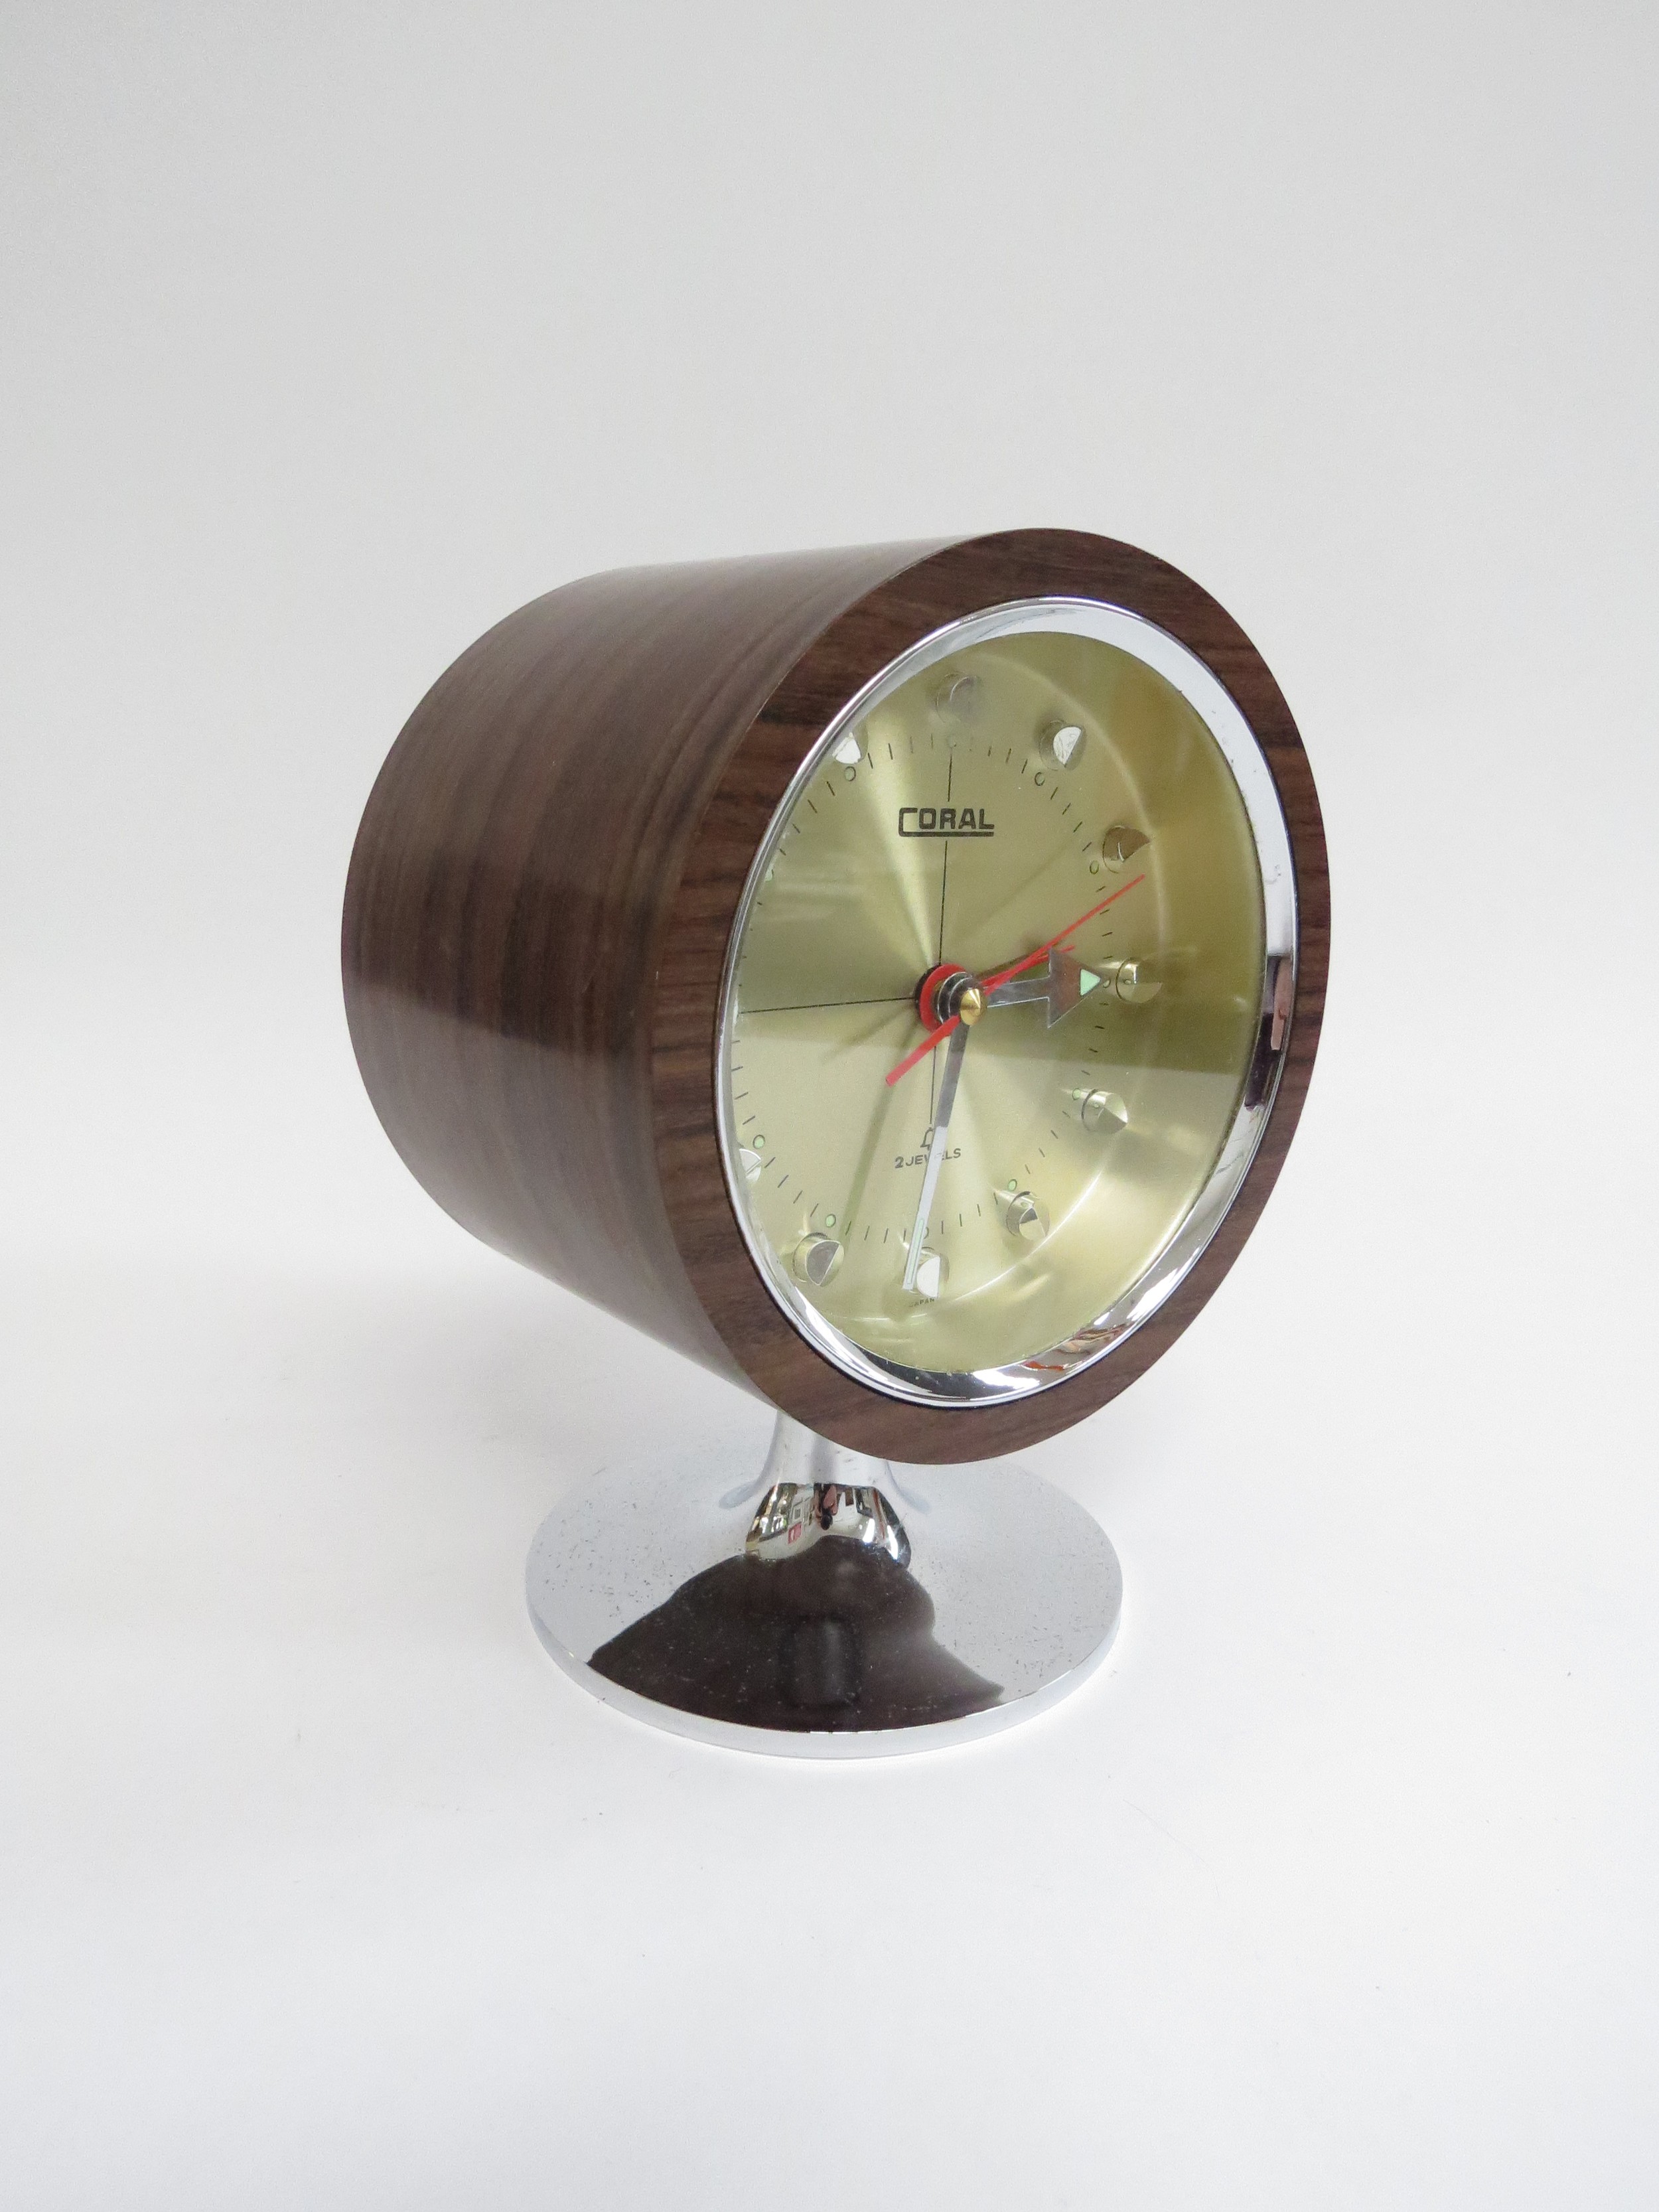 A c1970's Coral pedestal clock, wood finish on a chromed plastic tulip base. 16cm high - Image 2 of 3